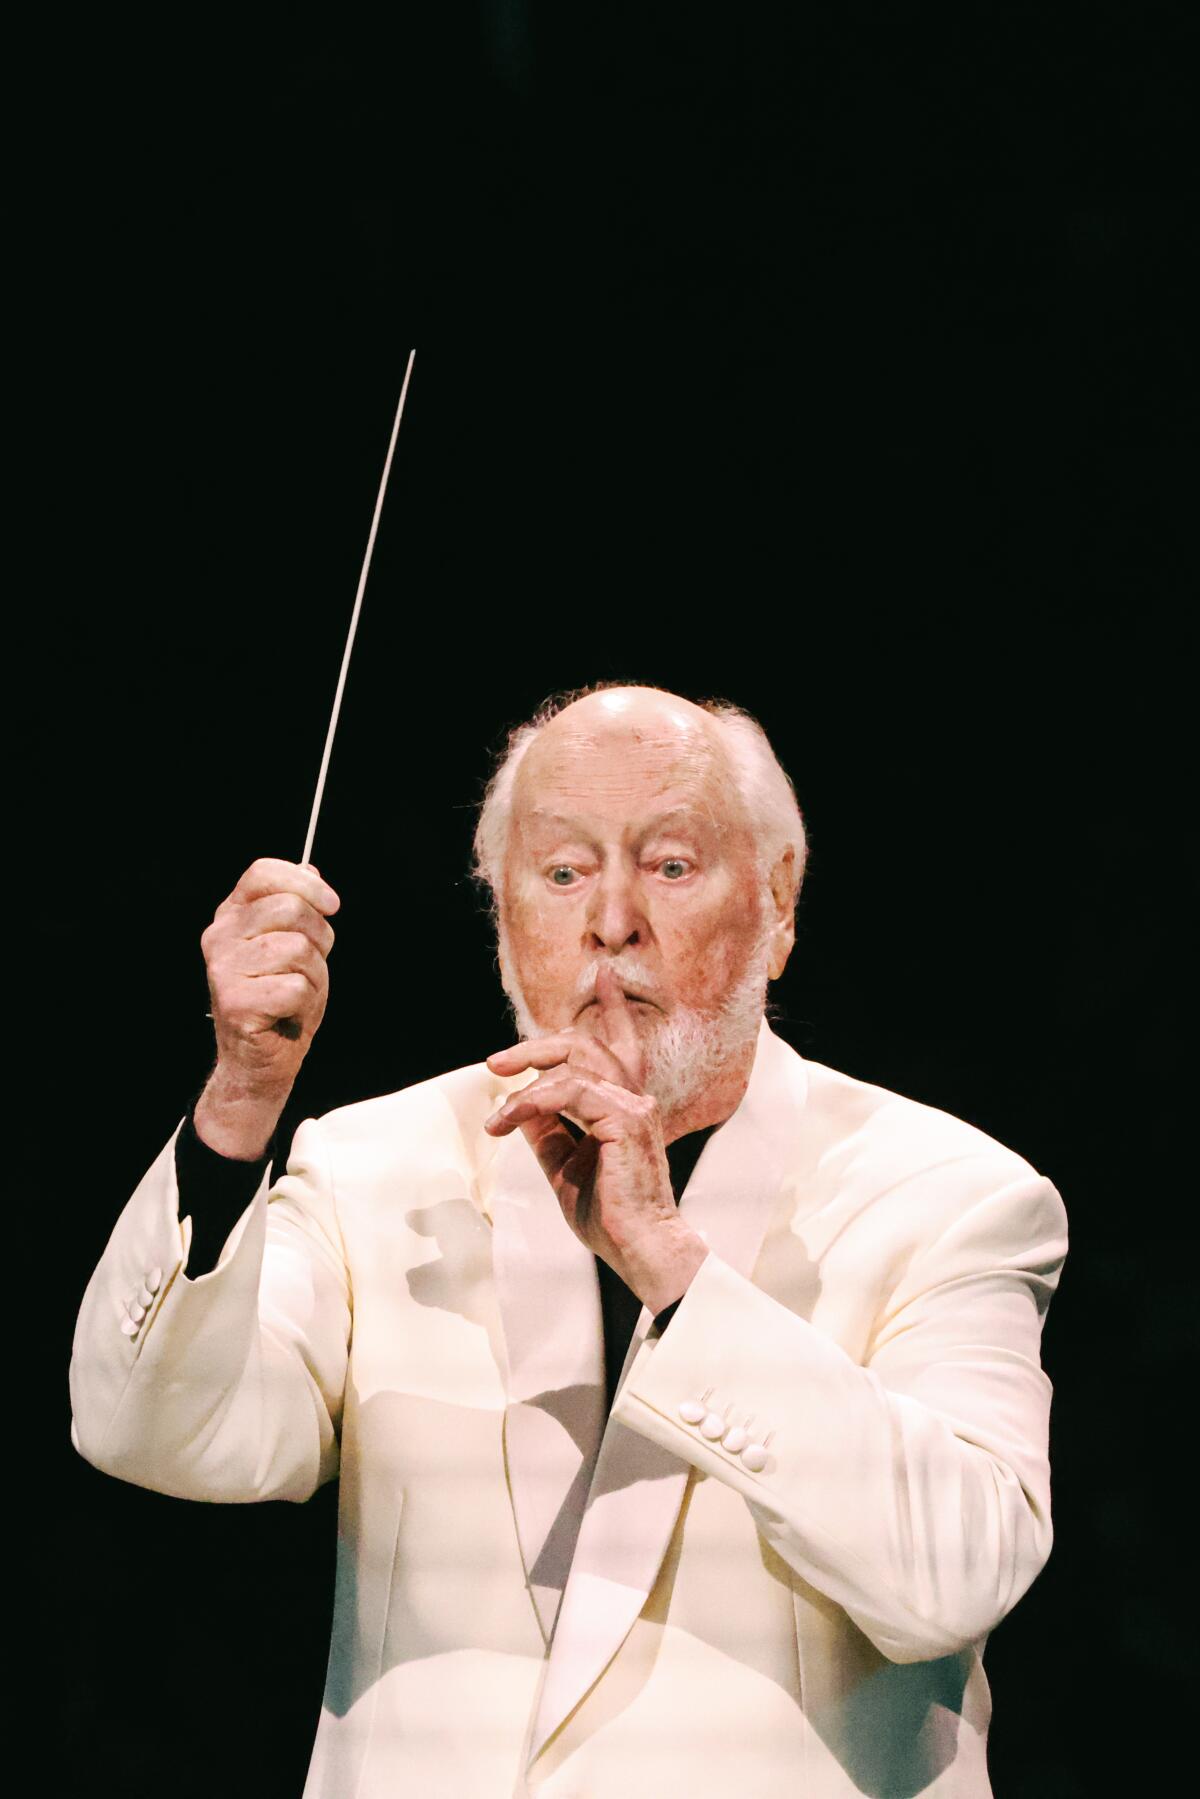 John Williams conducts at the Hollywood Bowl over the summer.